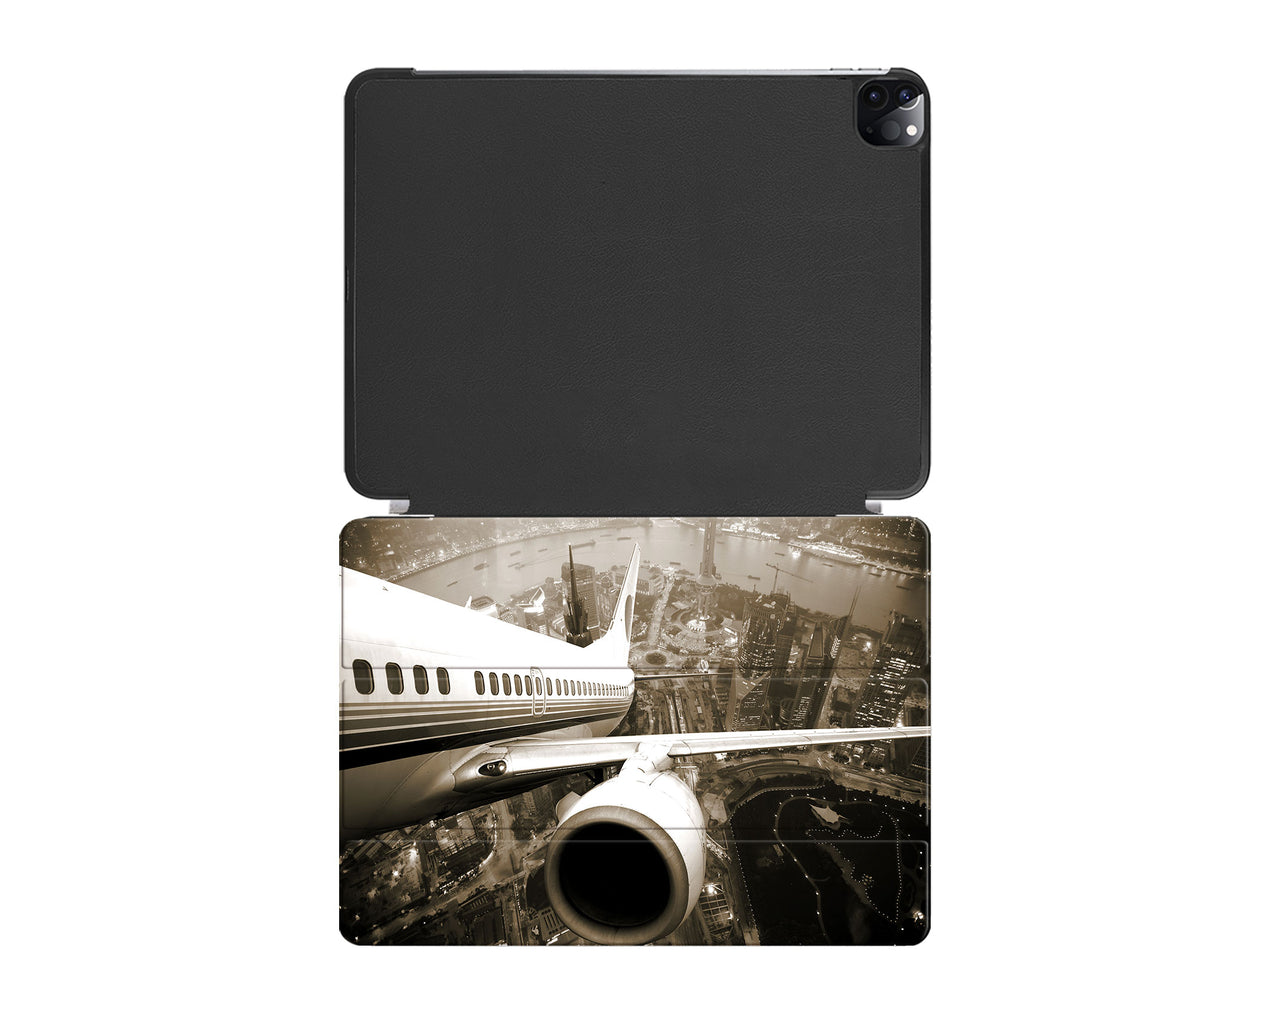 Departing Aircraft & City Scene behind Designed iPad Cases